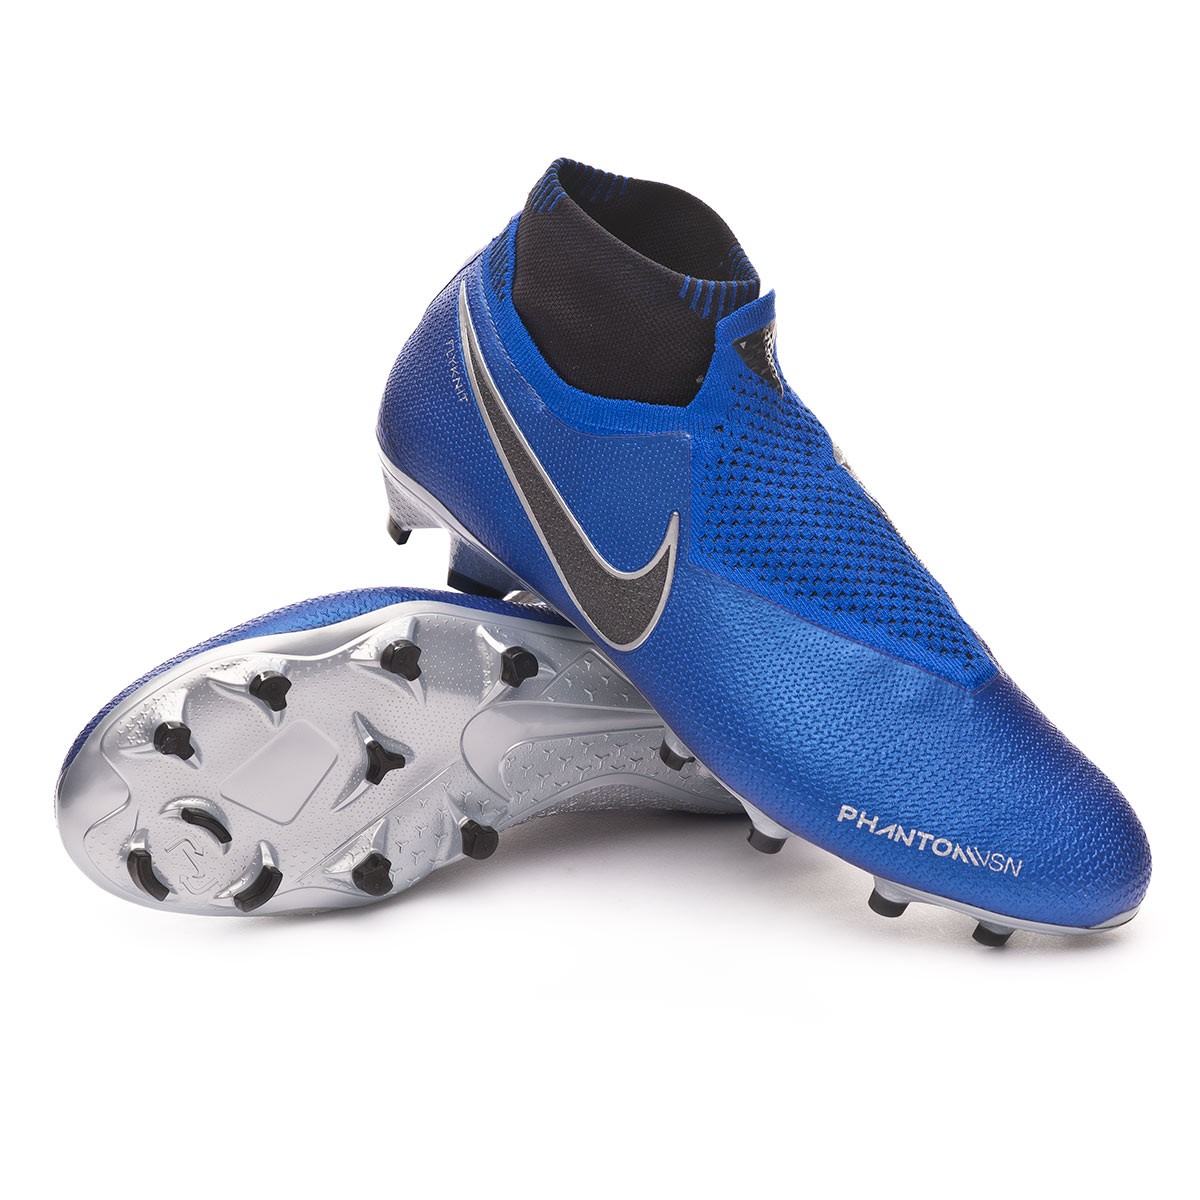 Nike React Phantom Vision Pro Indoor Review Soccer Reviews For